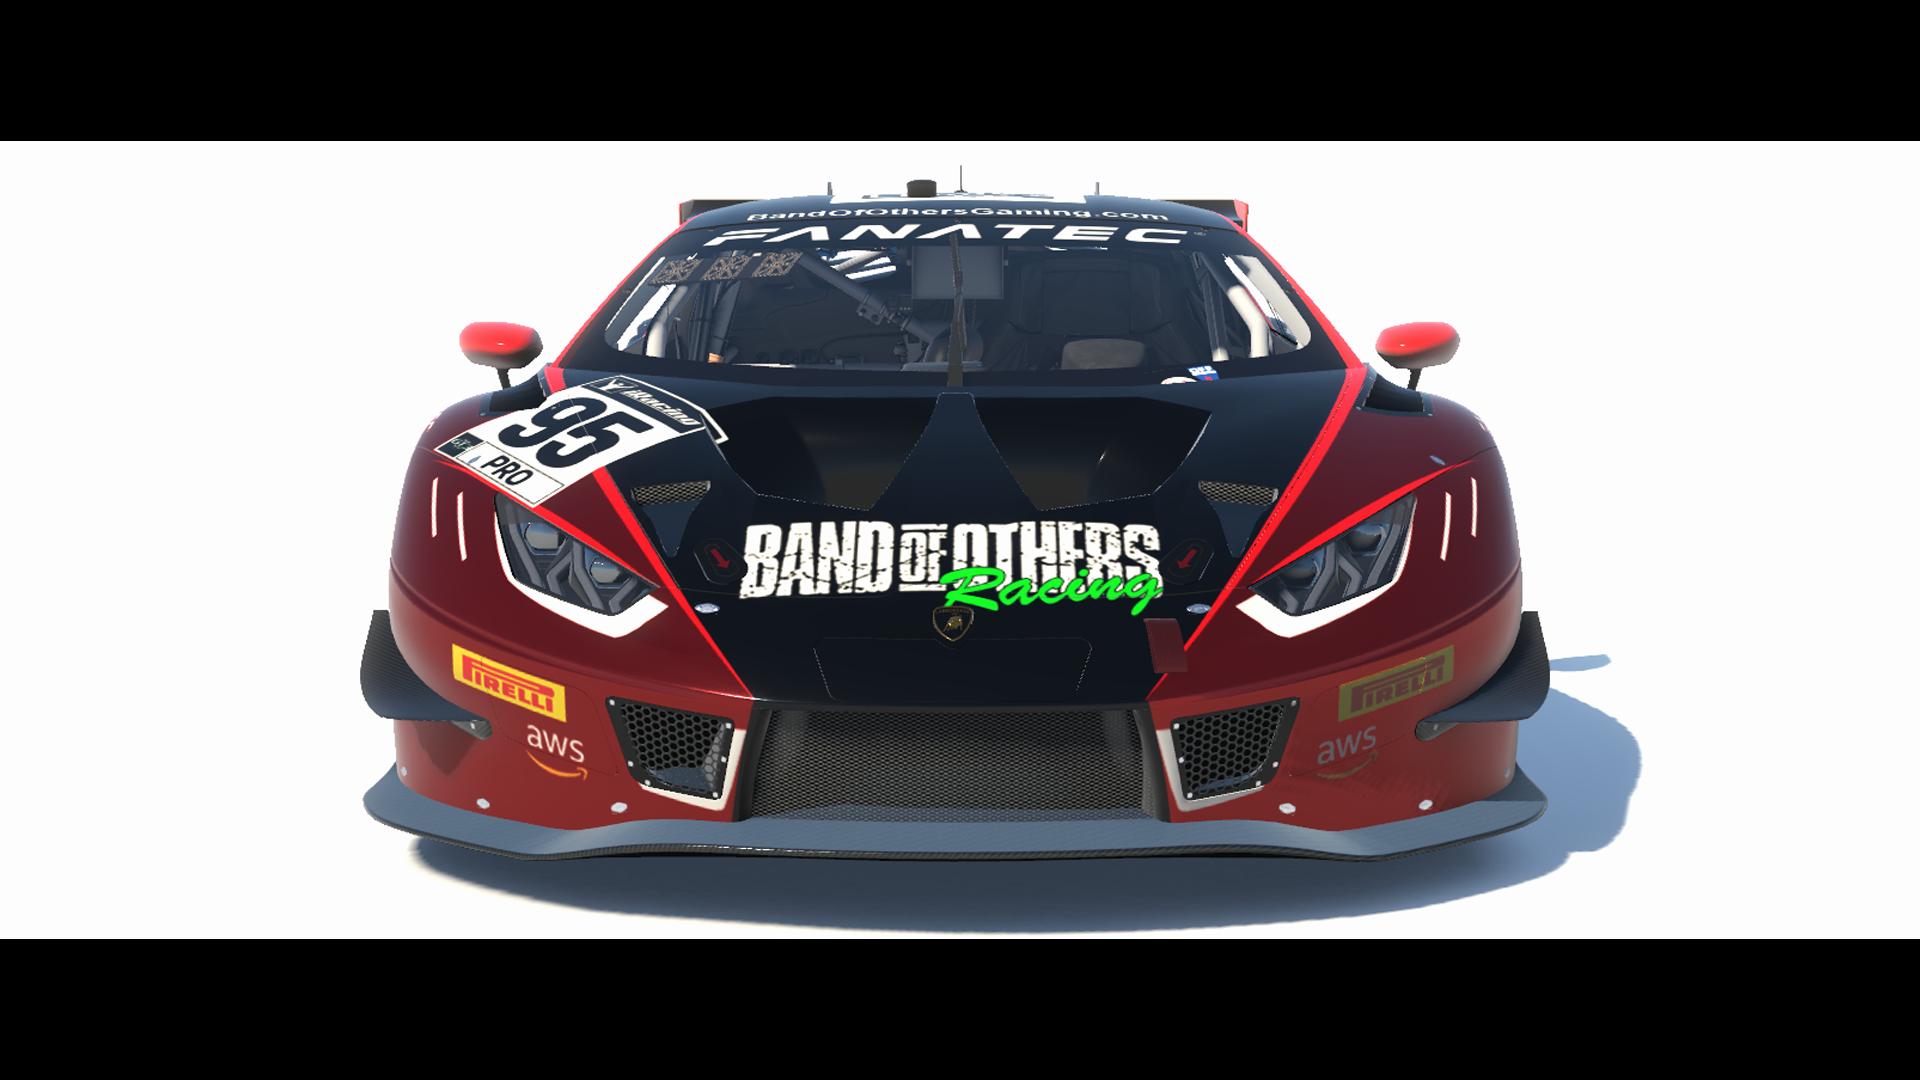 Preview of Band of Others Endurance 2022 Lamborghini Huracan GT3 Evo by Ken Lindberg